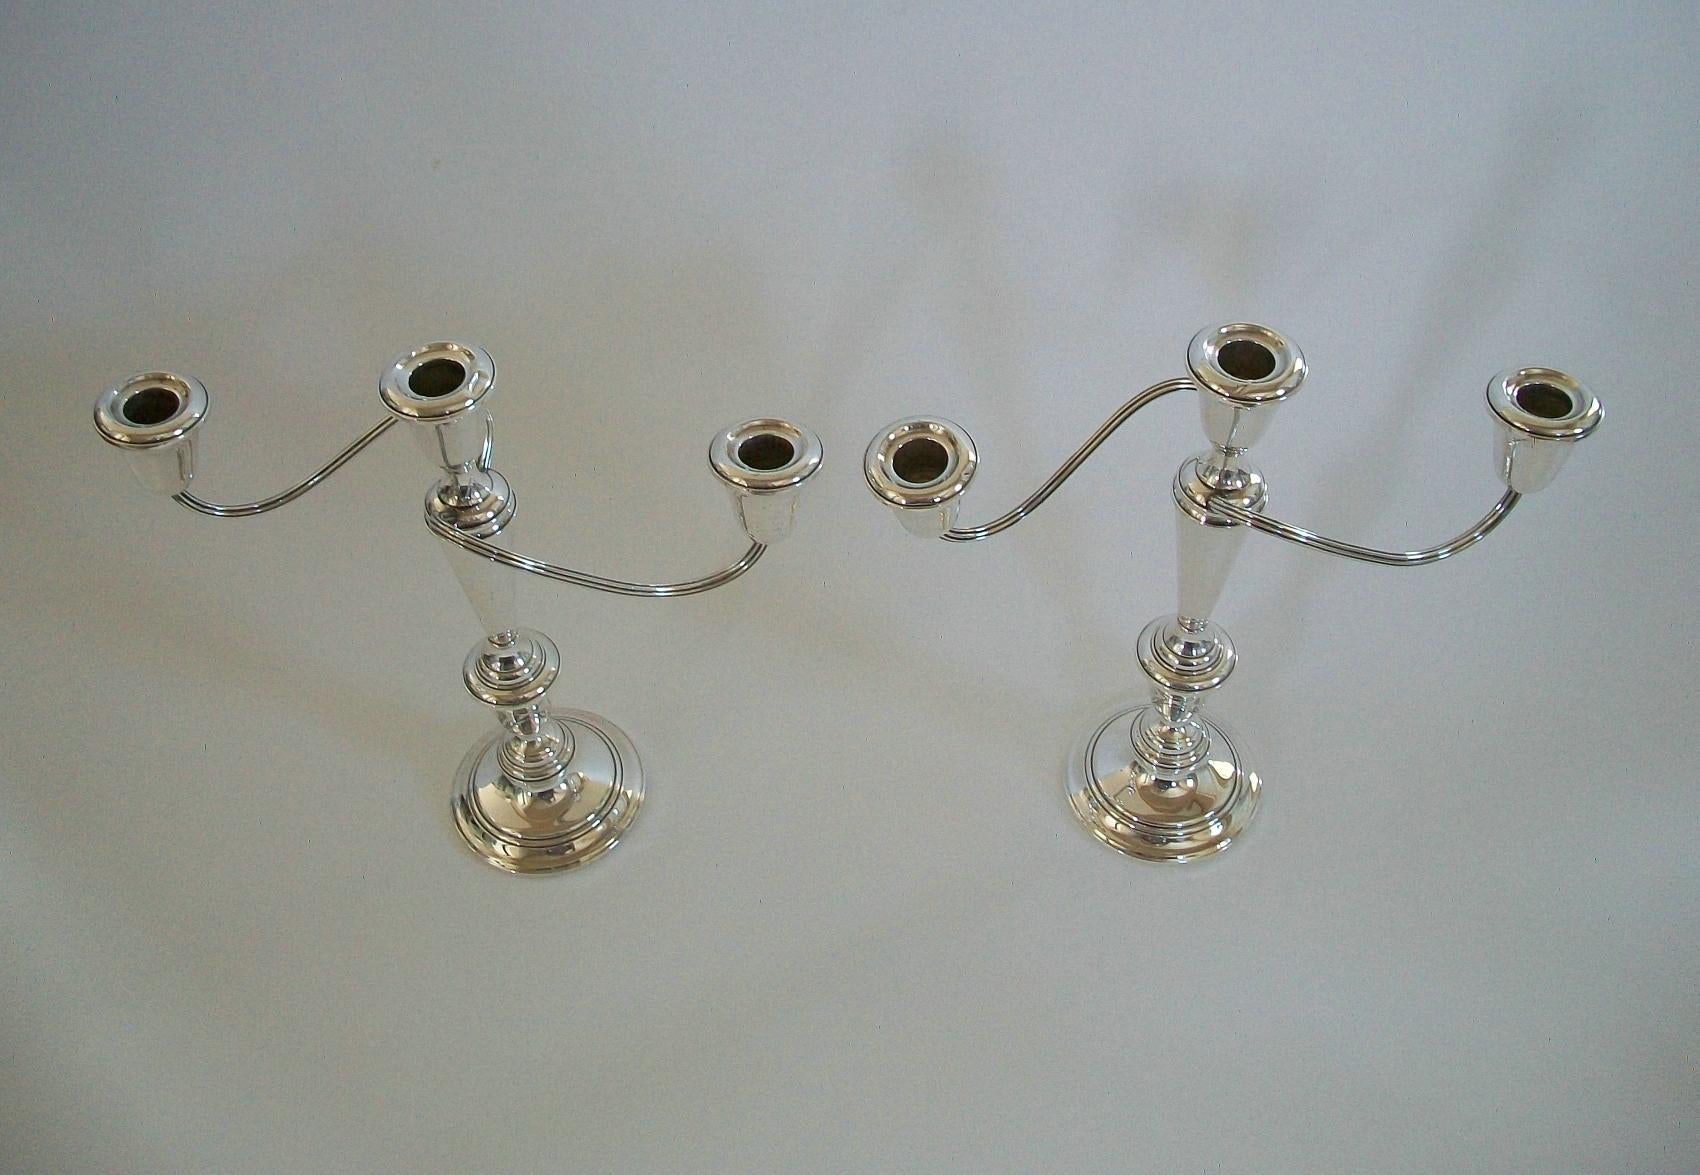 NEWPORT - Pair of Sterling Silver Candelabra - Weighted - U.S.A. - 20th Century For Sale 1